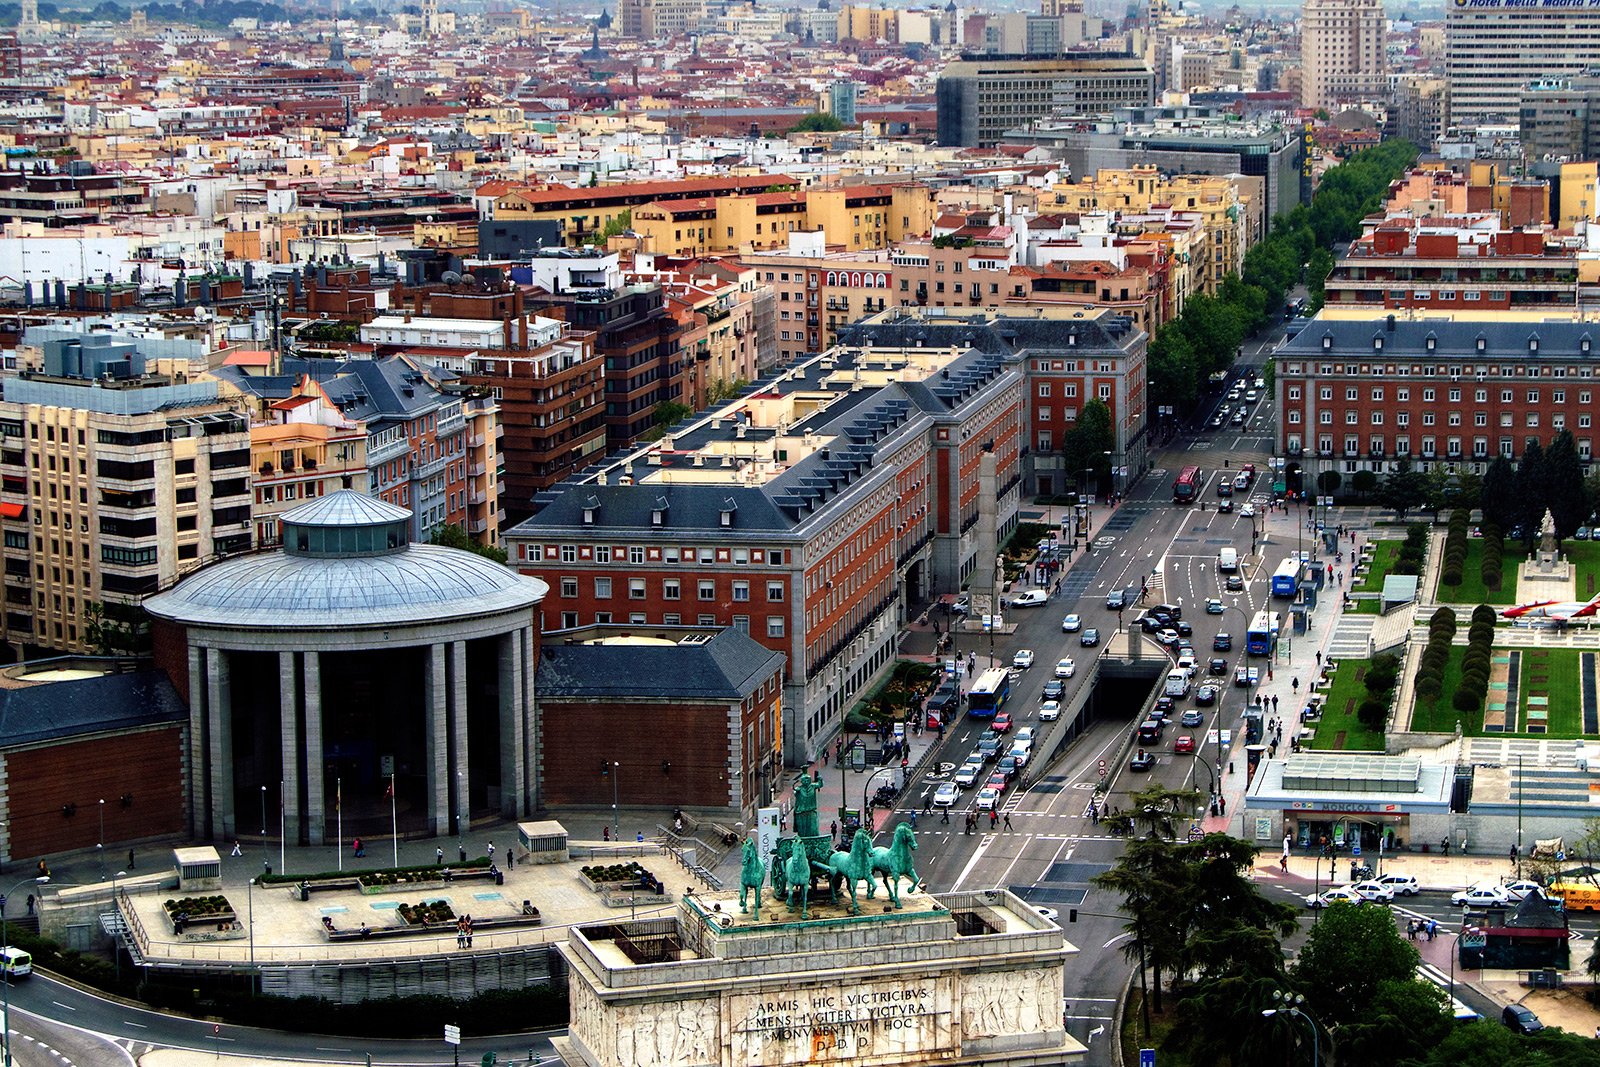 How to get on the top of the Lighthouse of Moncloa in Madrid